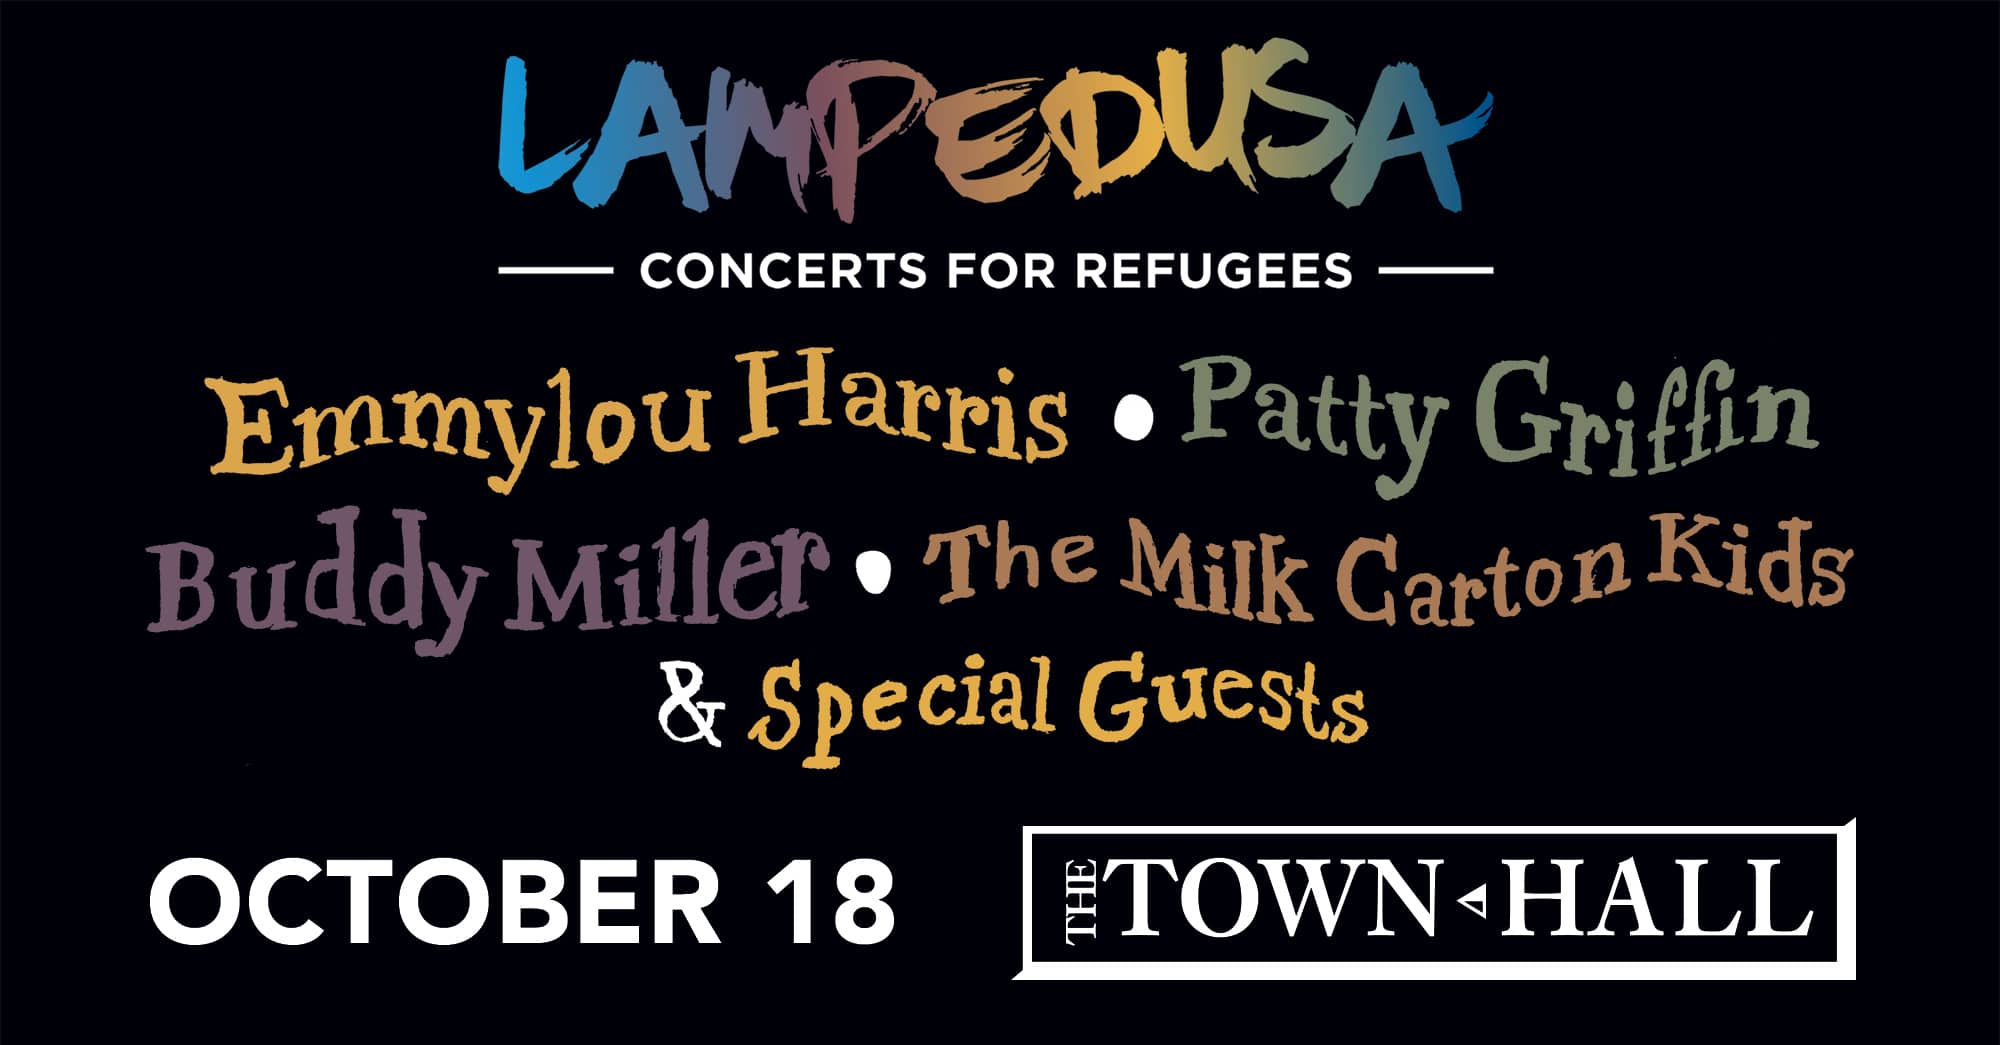 Sponsored content: LampedUSA concert for Refugees at NYC Town Hall Oct 18